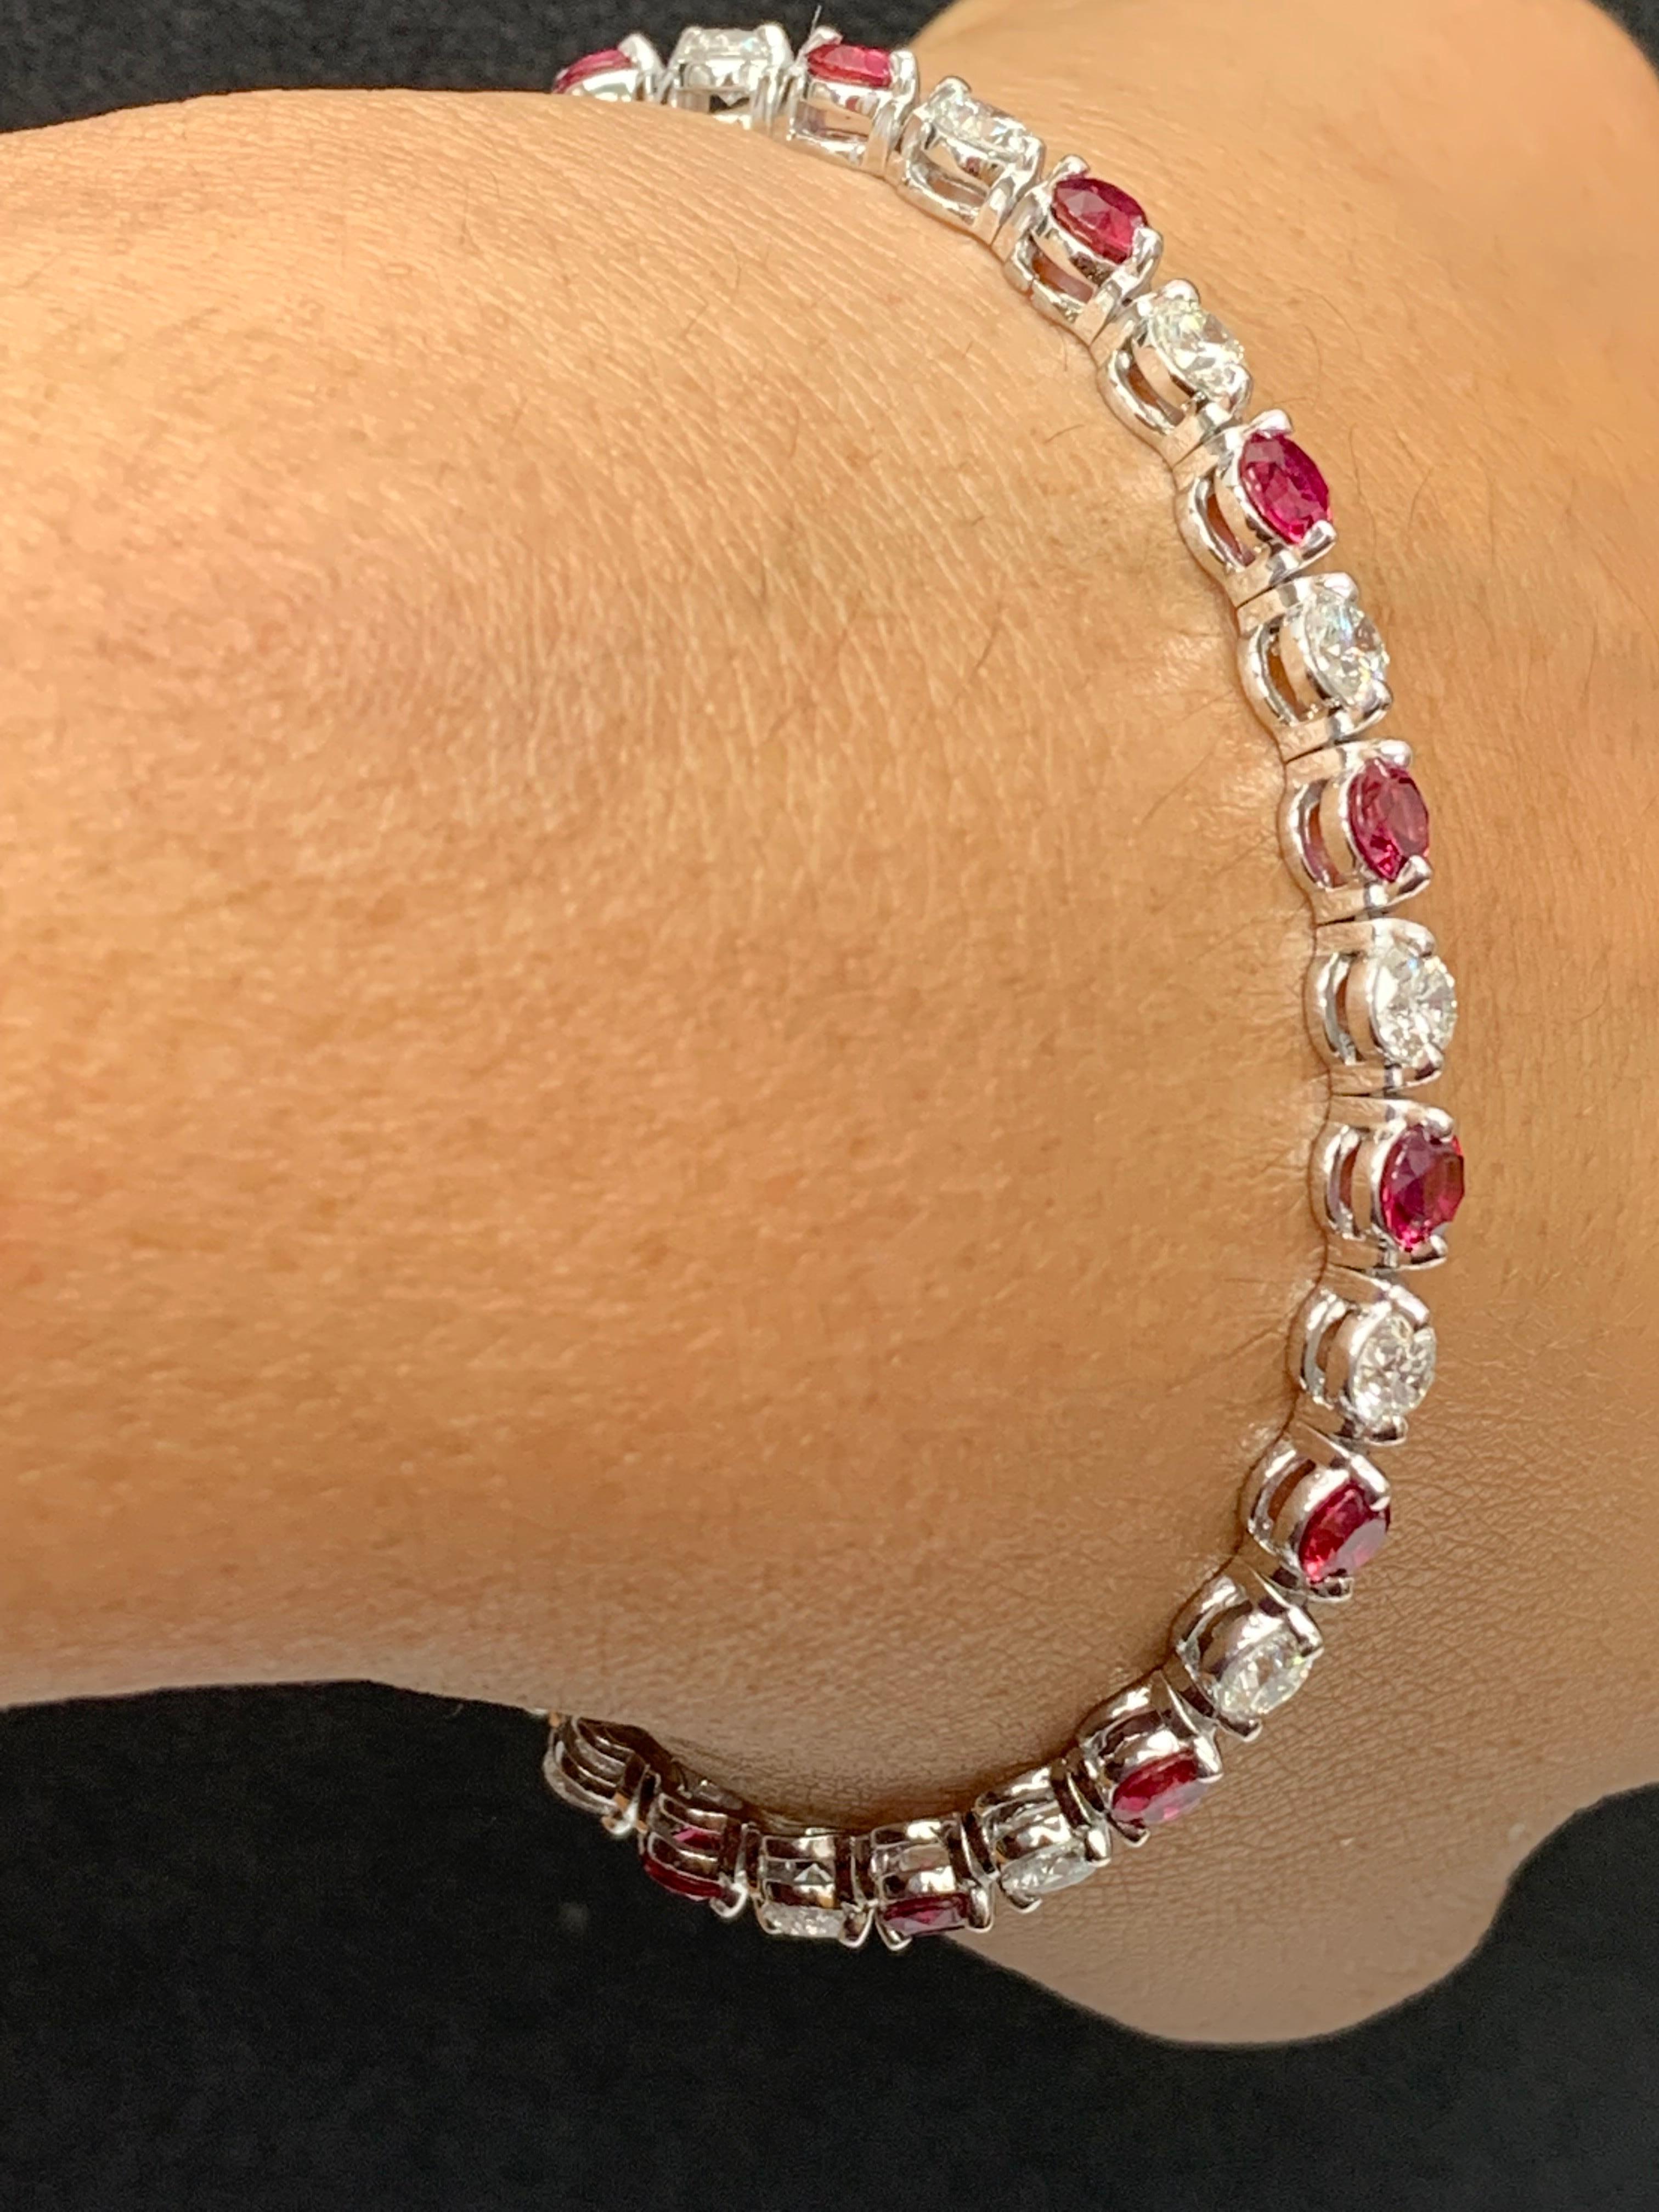 4.55 Carat Round Ruby and Diamond Bracelet in 14k White Gold For Sale 2